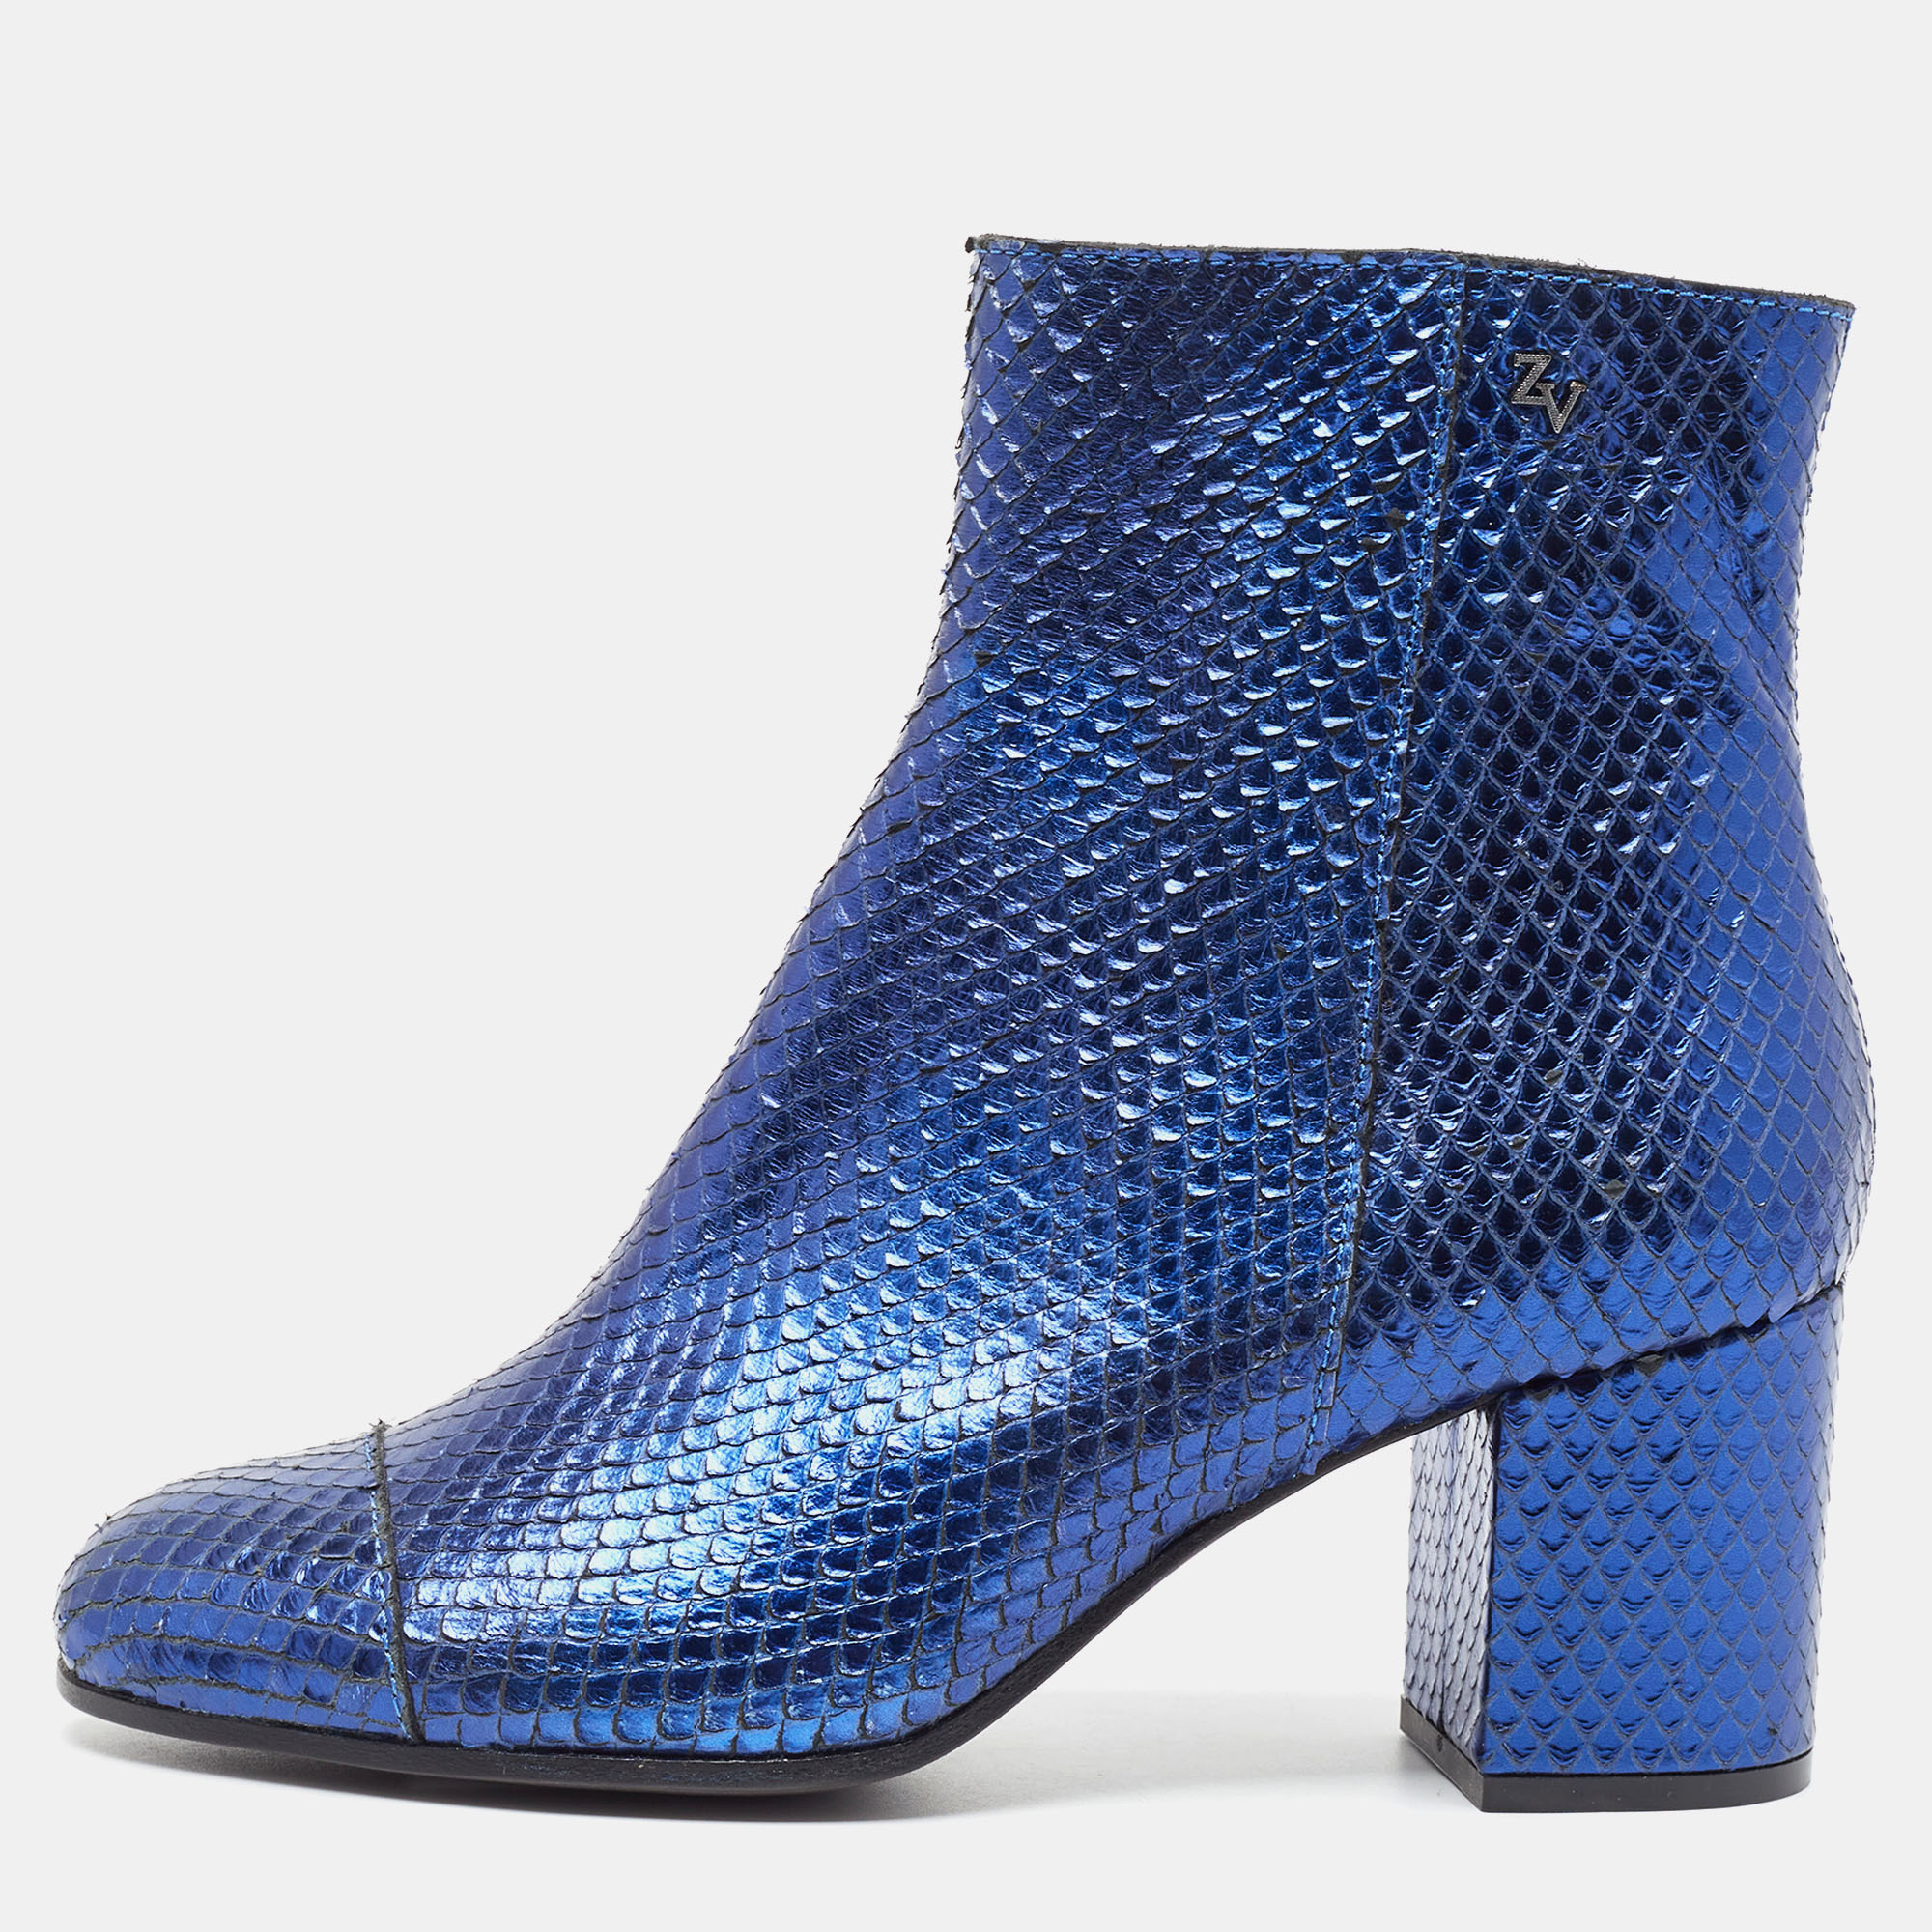 Pre-owned Zadig & Voltaire Zadiq & Voltaire Blue Python Leather Block Heel Ankle Boots Size 37